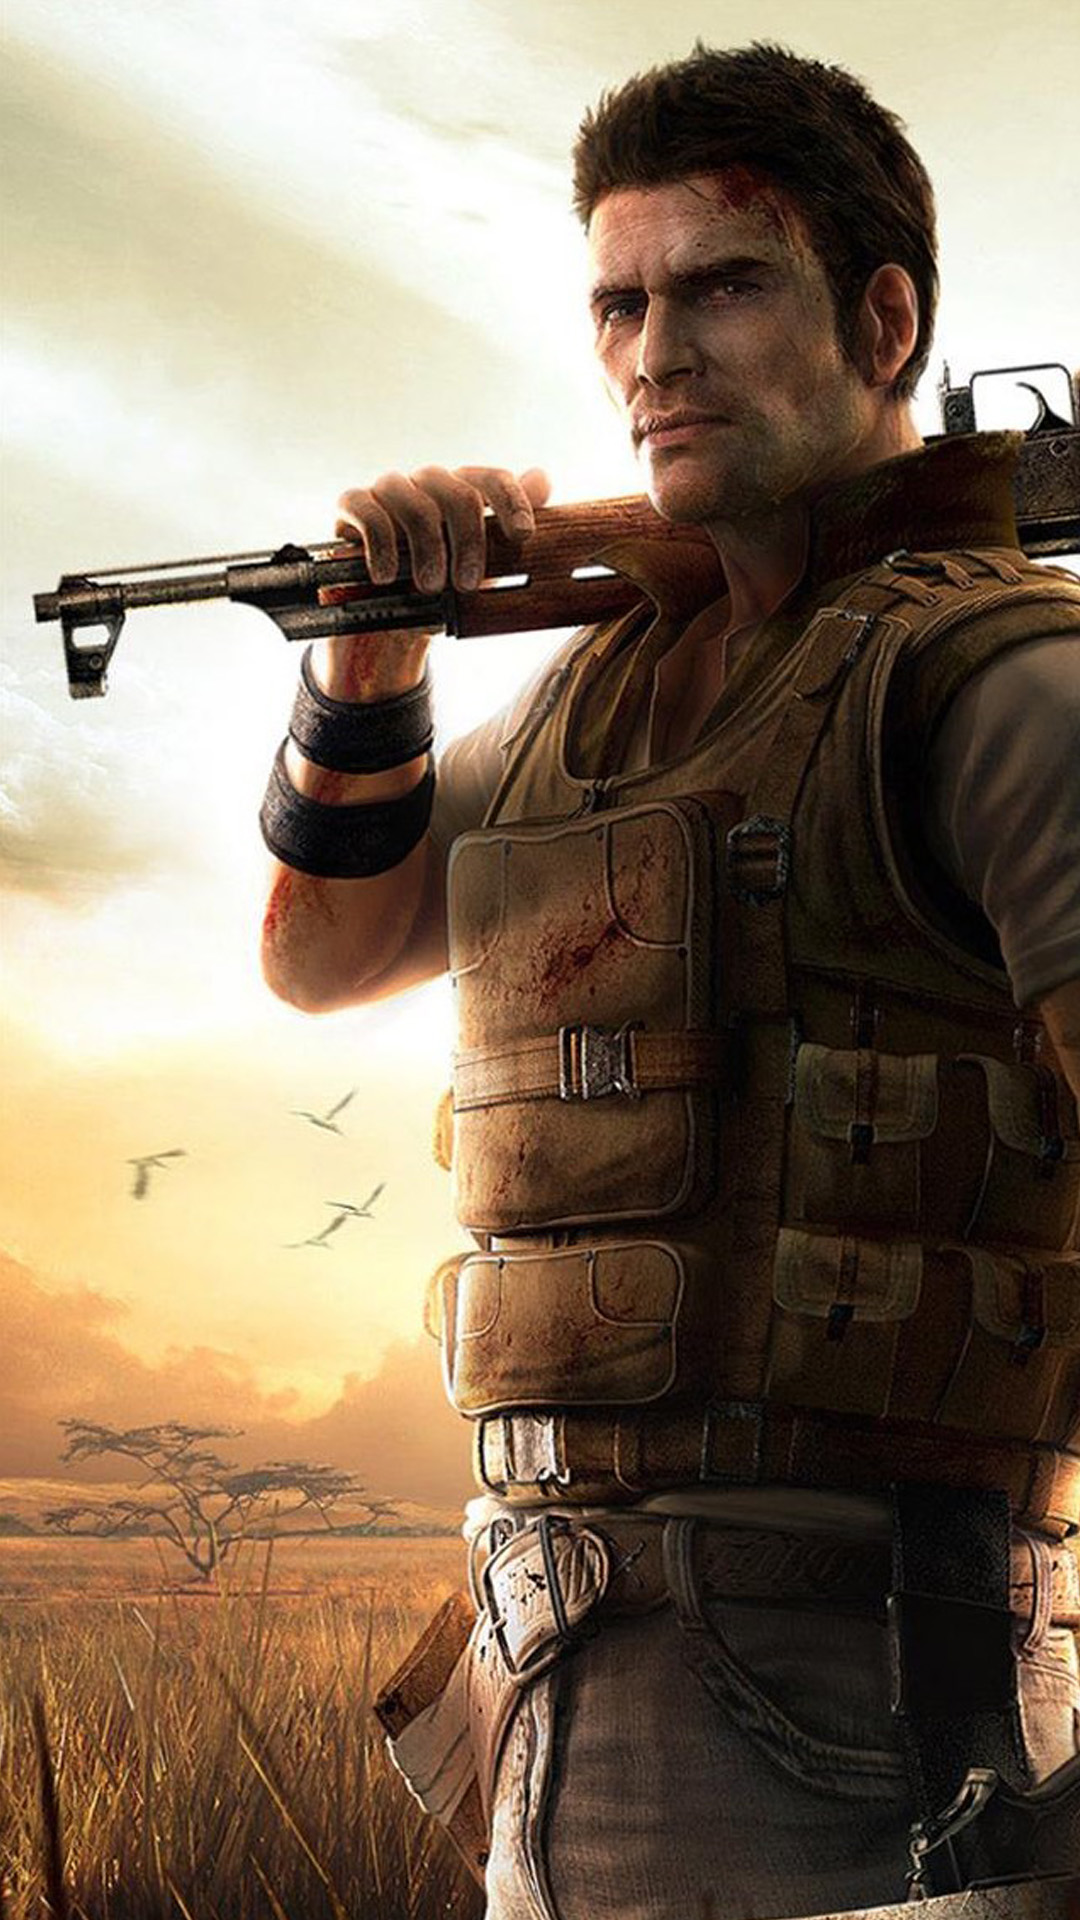 games hd wallpapers for android,action adventure game,movie,shooter game,pc game,soldier